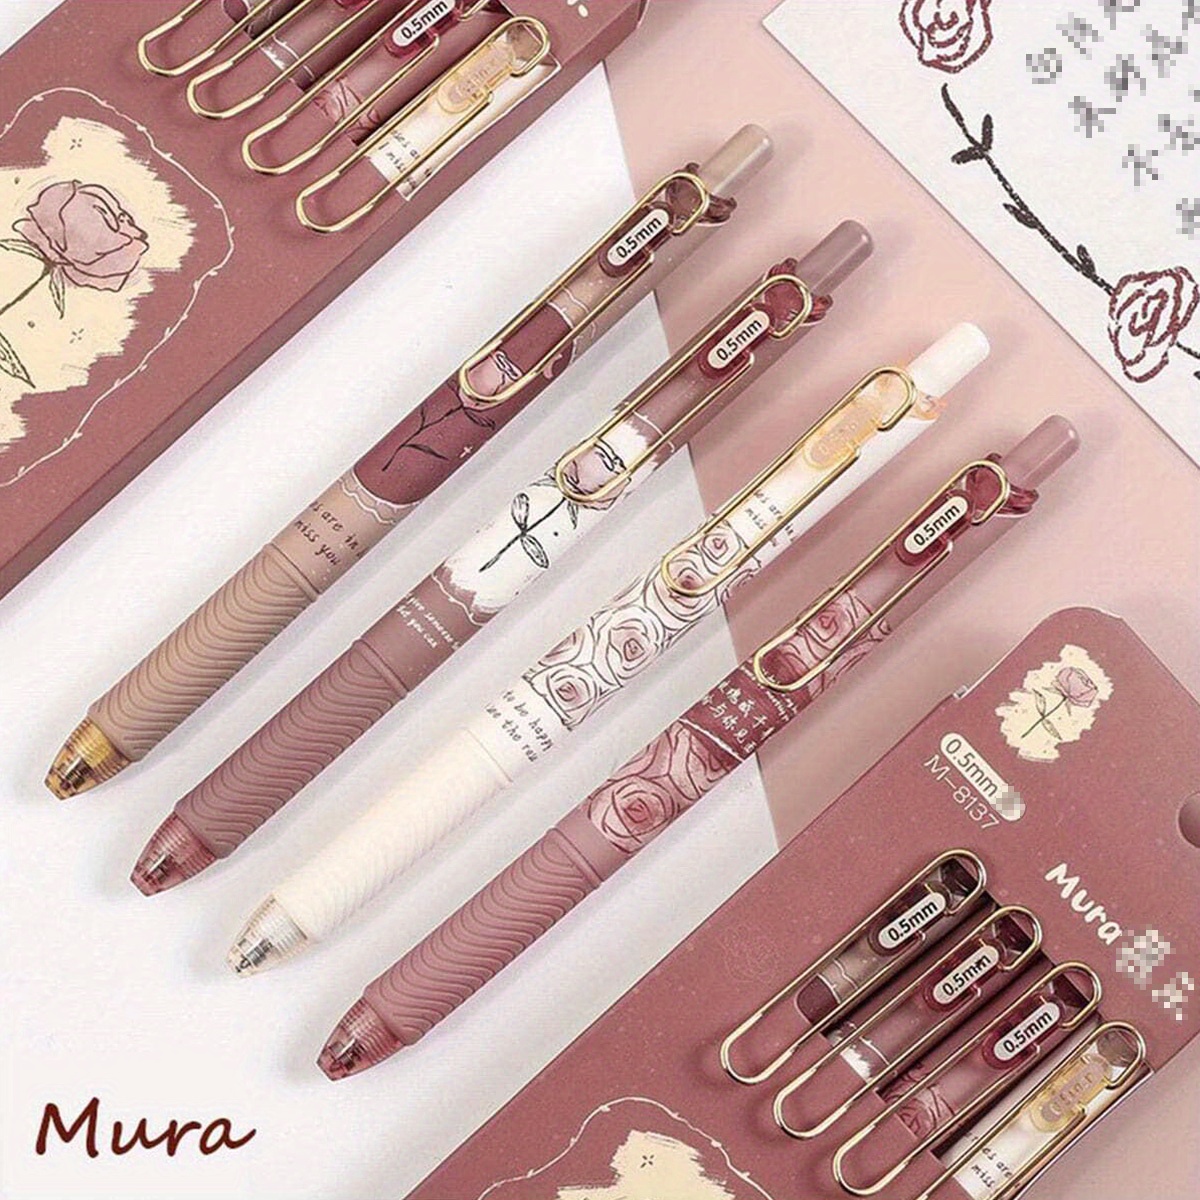 

4pcs, Cute Gel Pens, Retractable Gel Pens, 0.5mm Quick-drying Black Ink Pens With Smooth Writing And Soft Grip, Suitable For Note-taking, Writing, Office, School And Learning Supplies